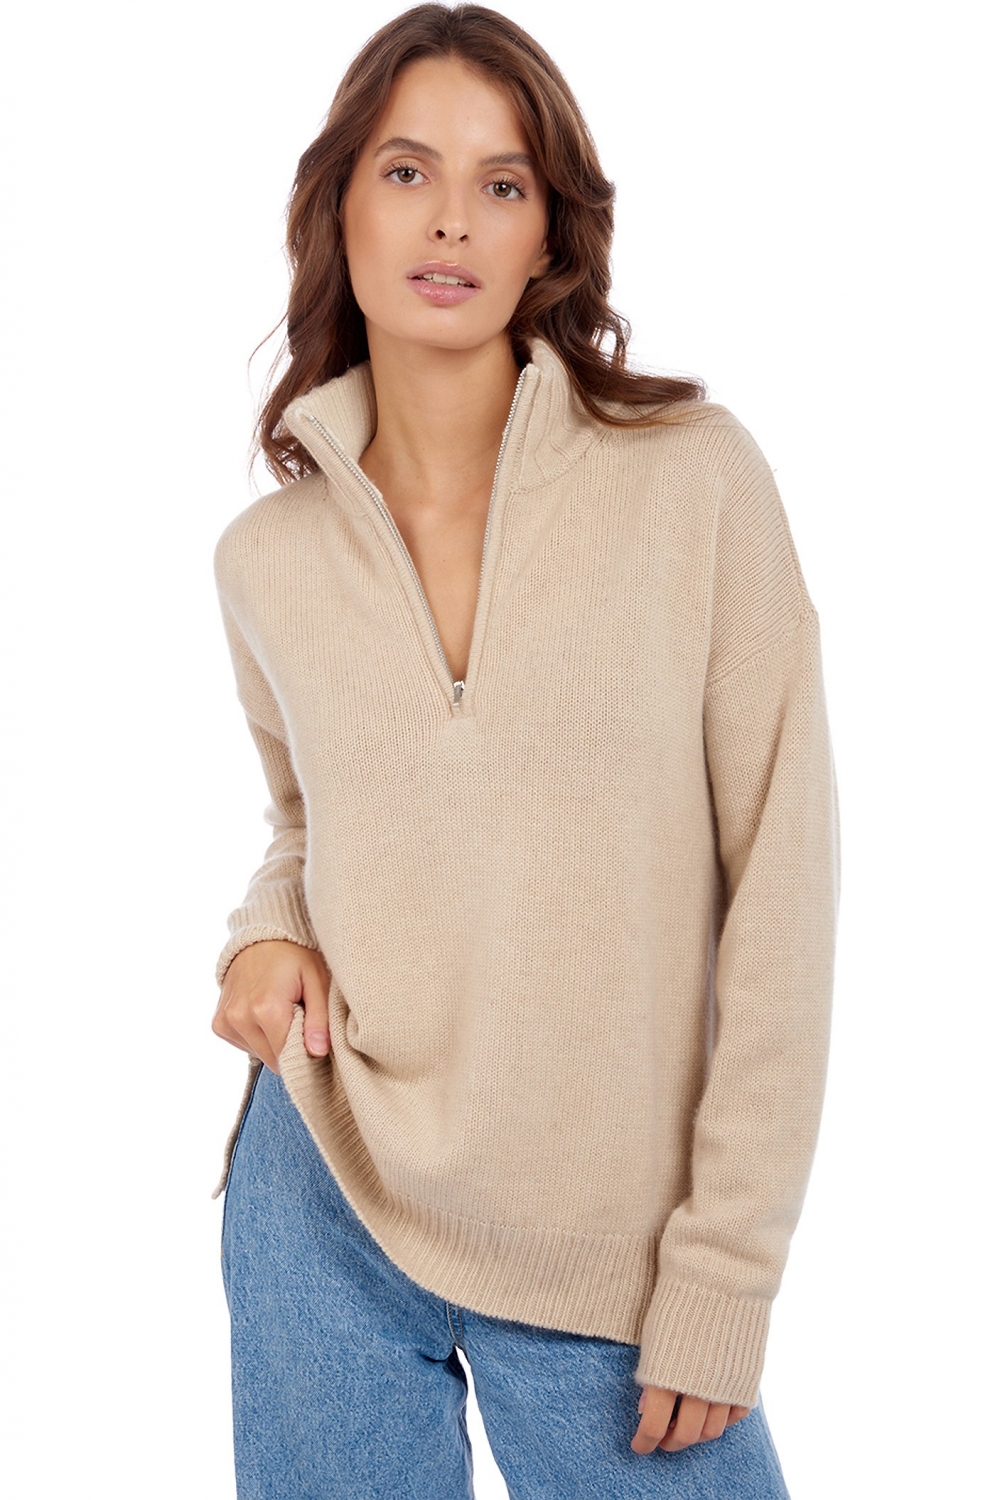 Cashmere ladies chunky sweater alizette natural beige 2xl